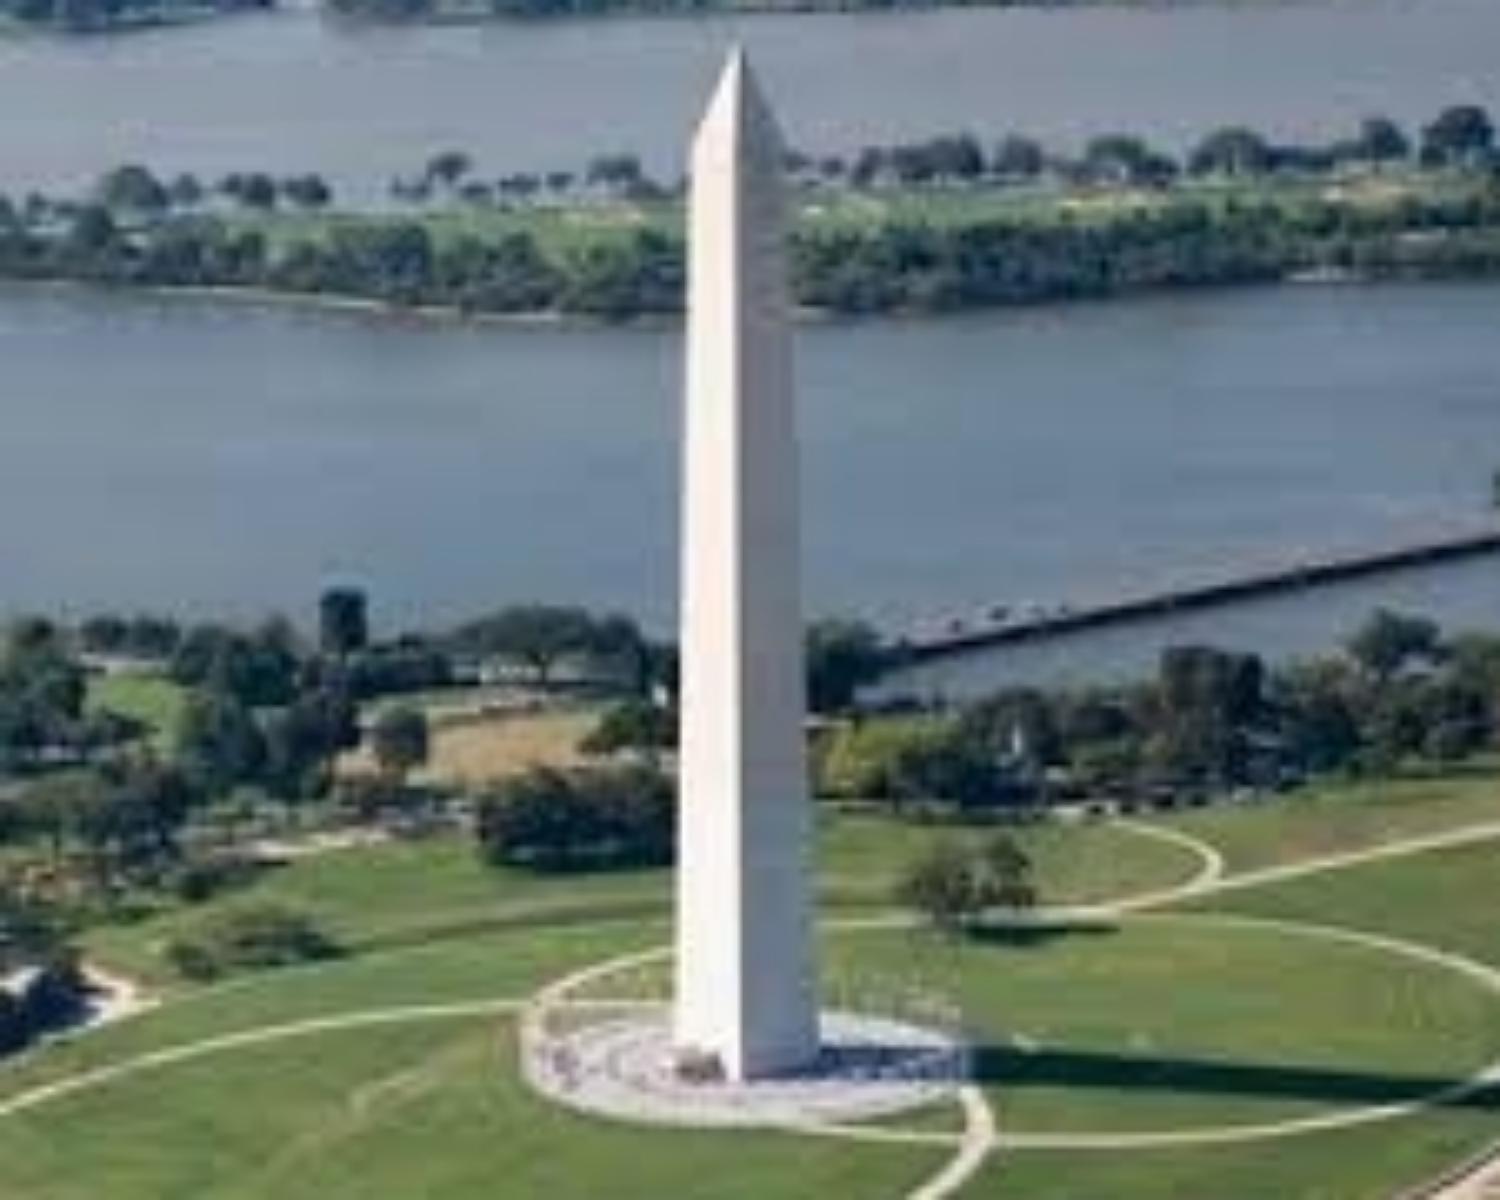 Using 5 Whys Problem Solving To Save The Washington Monument